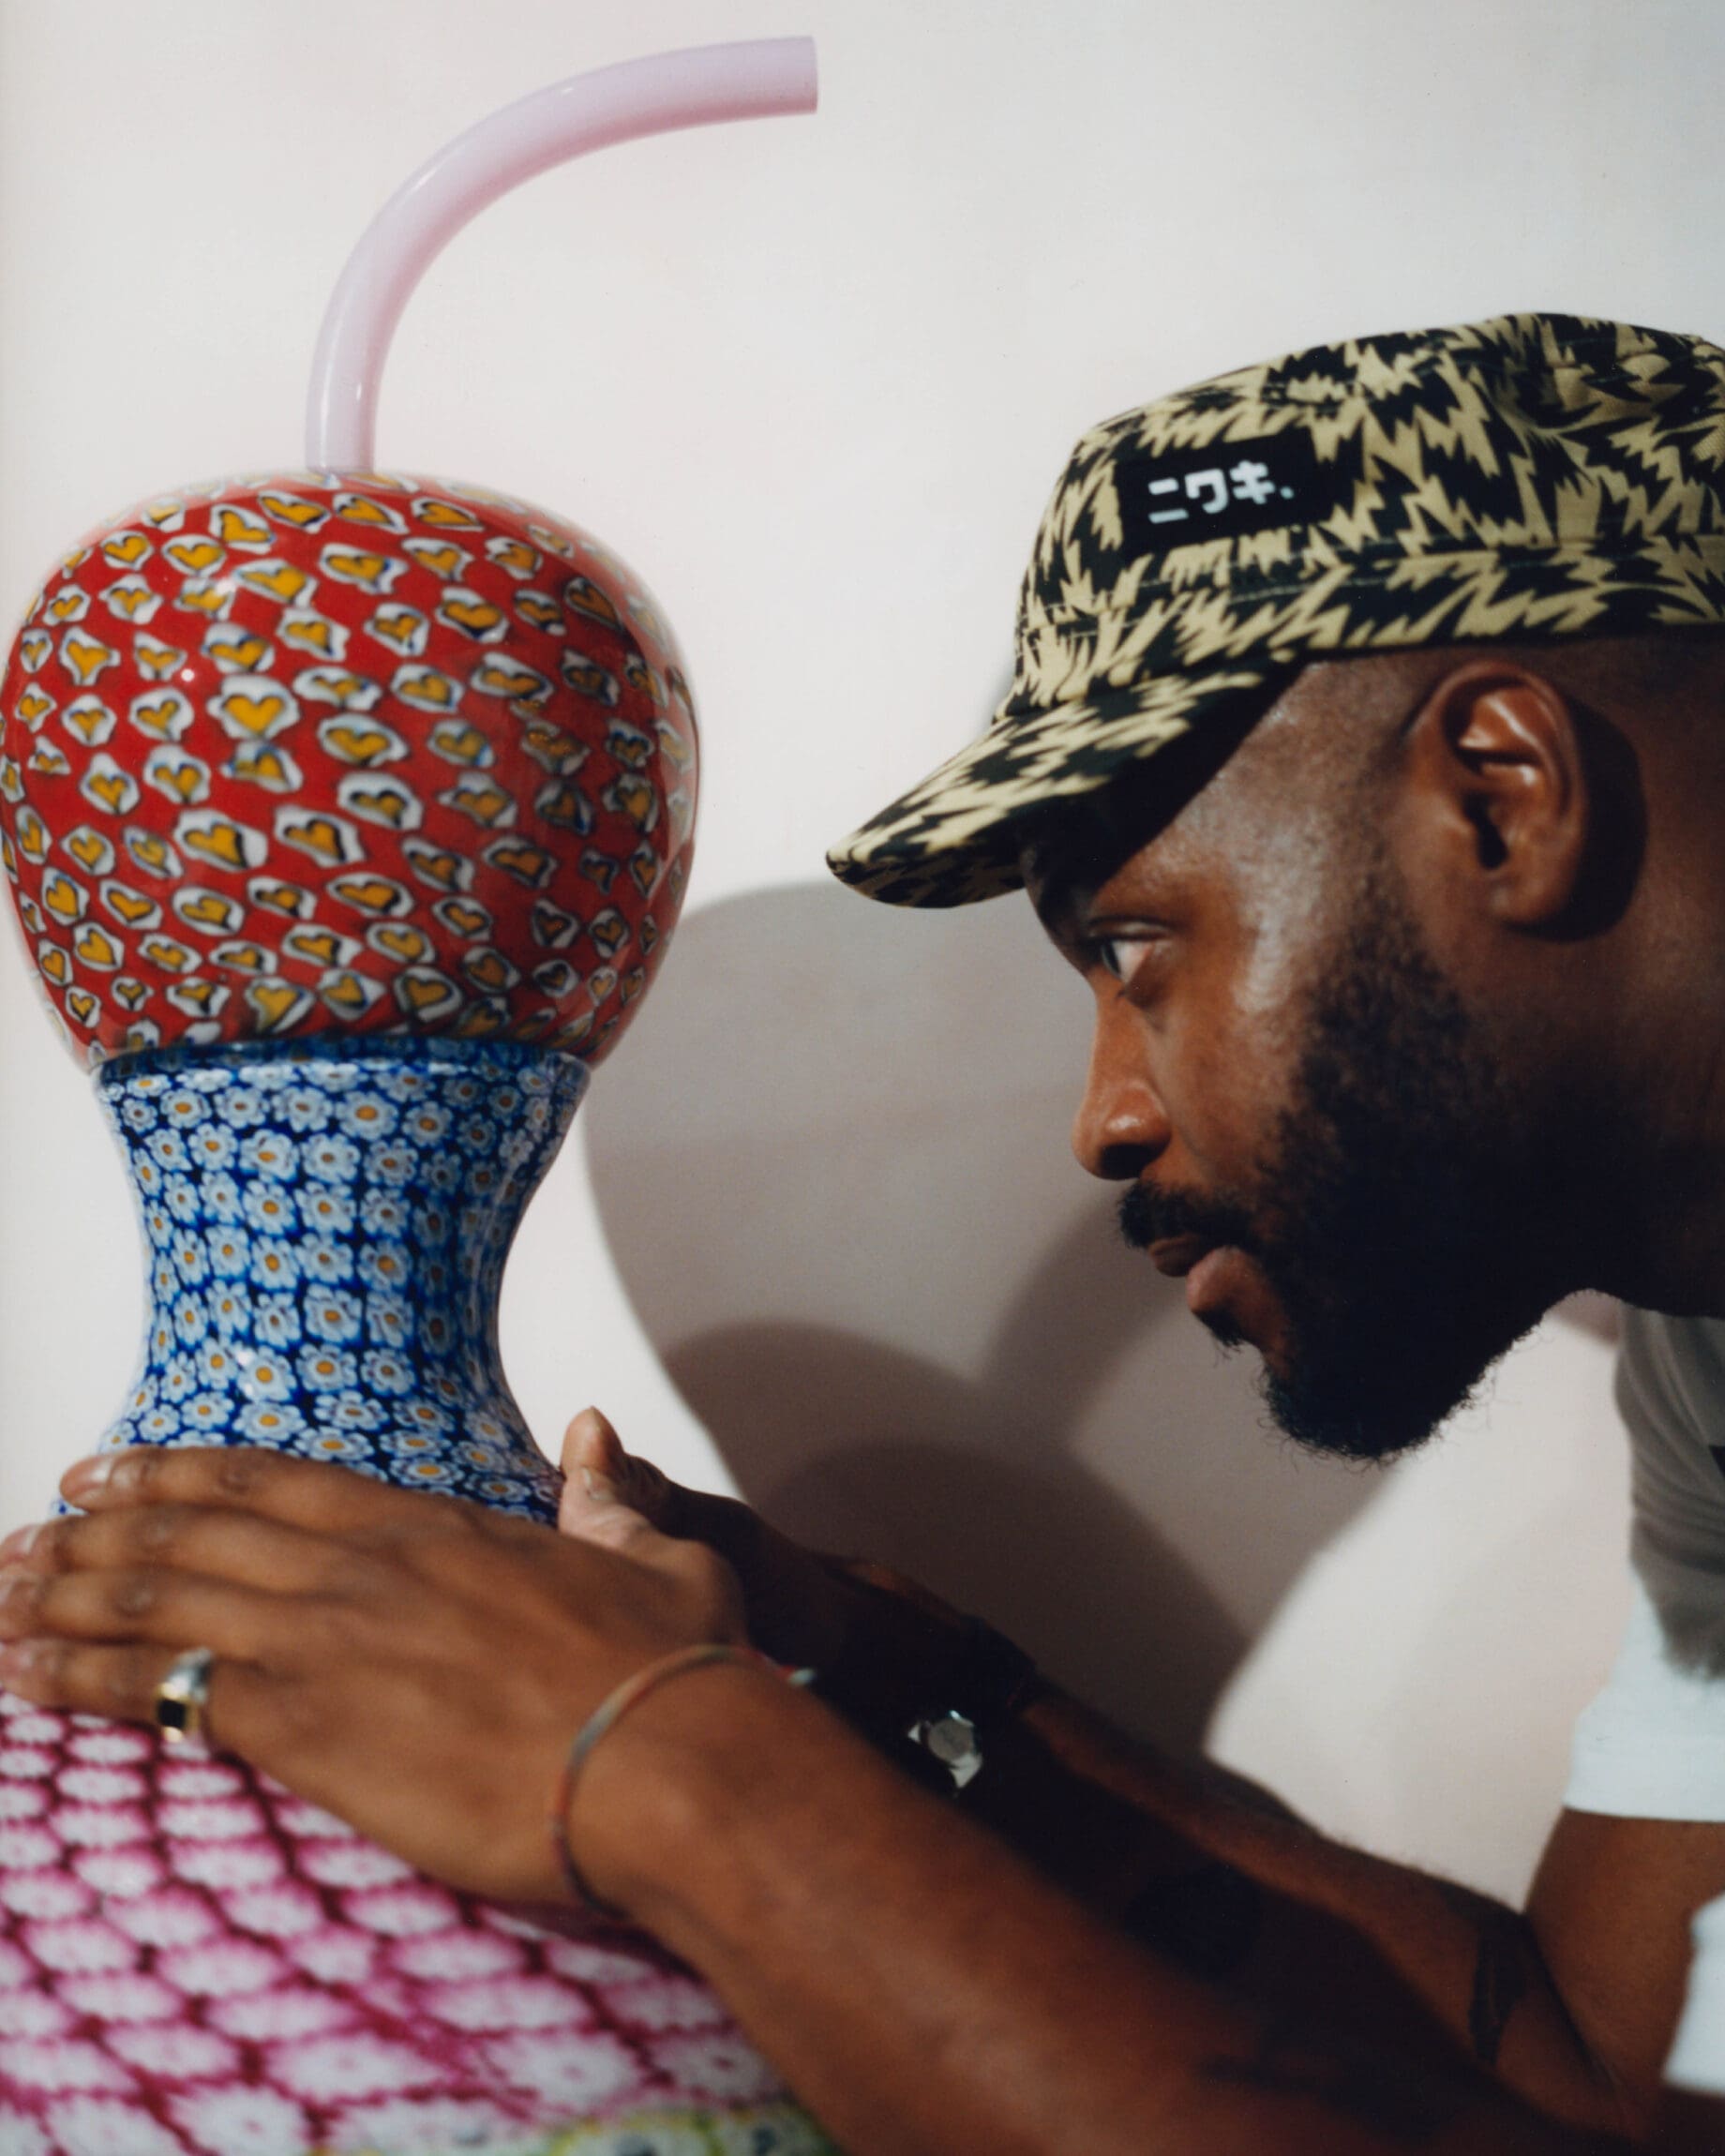 Yinka Ilori on the importance of joy and affirmation in his practice | A portrait of Yinka Ilori sat with his original murano glass sculpture.